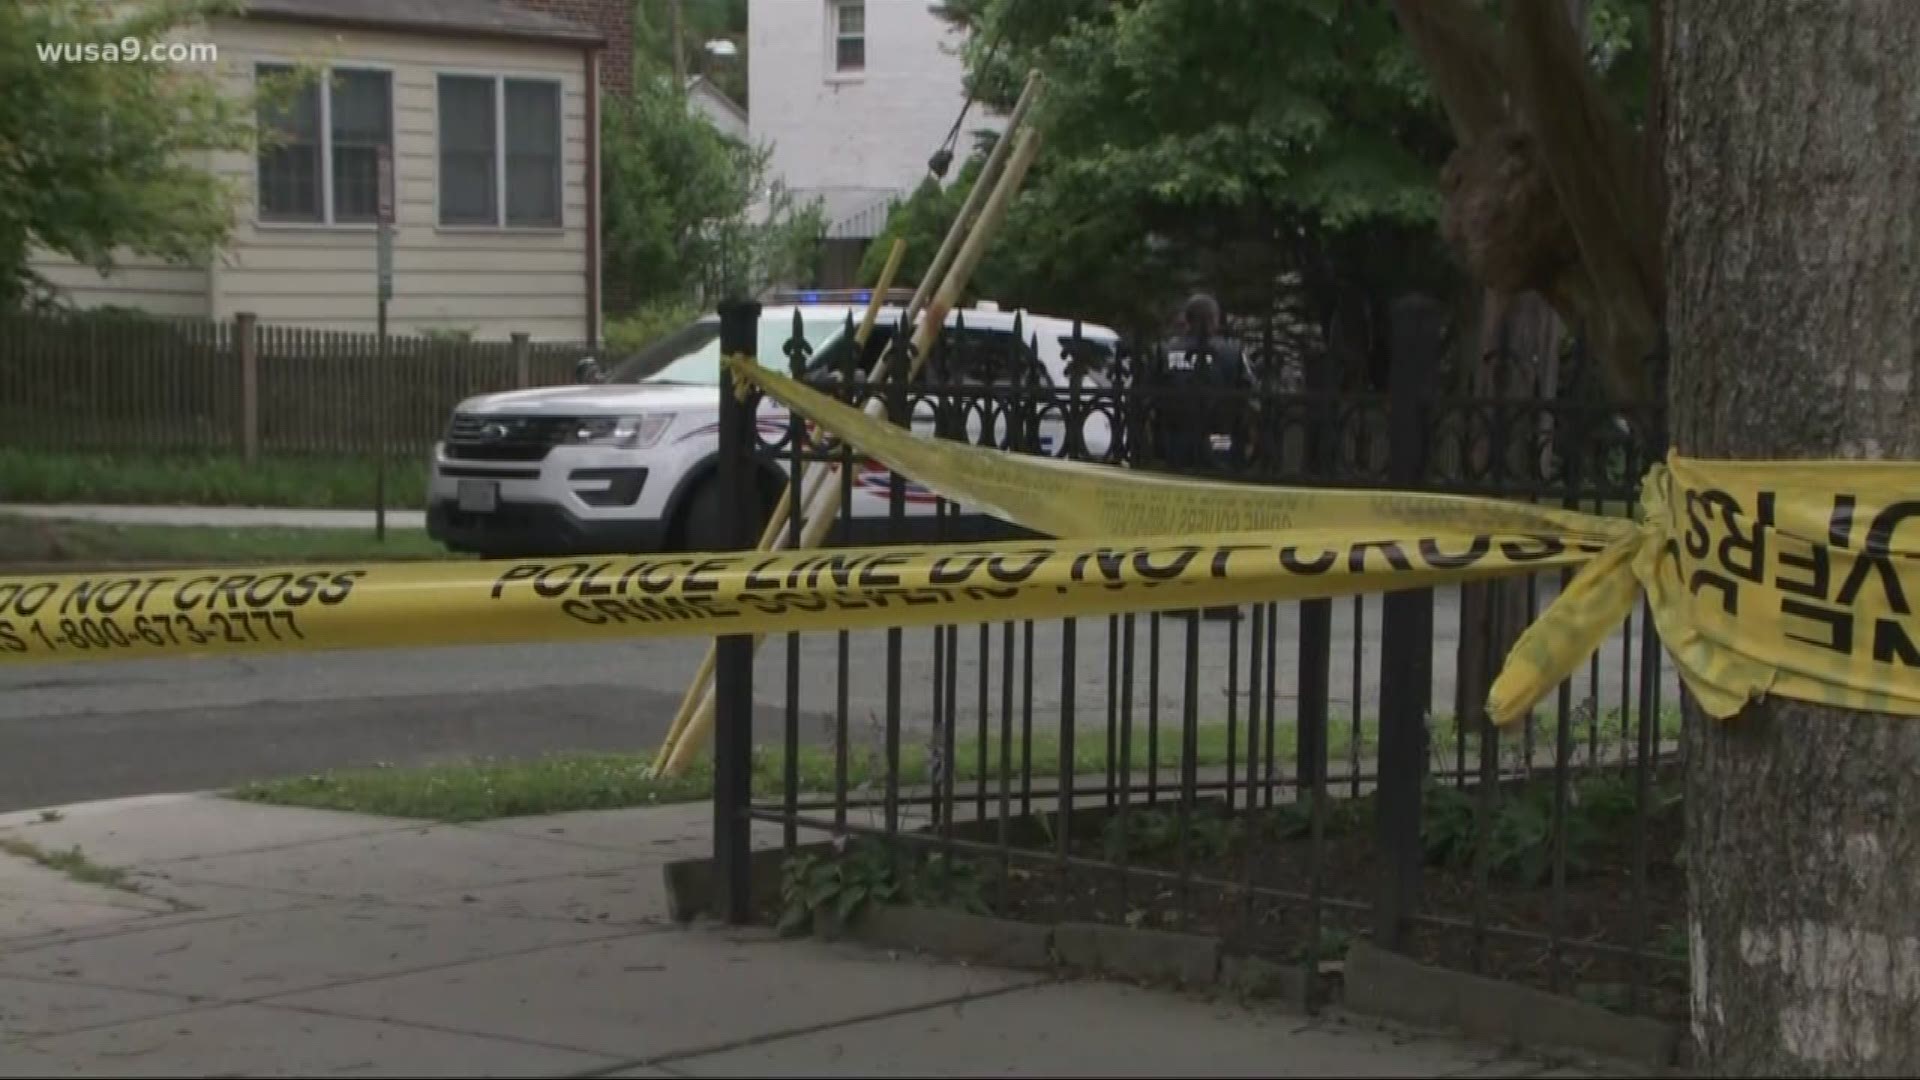 The bodies were found Friday morning in a home in the Northwest DC neighborhood of American University Park.